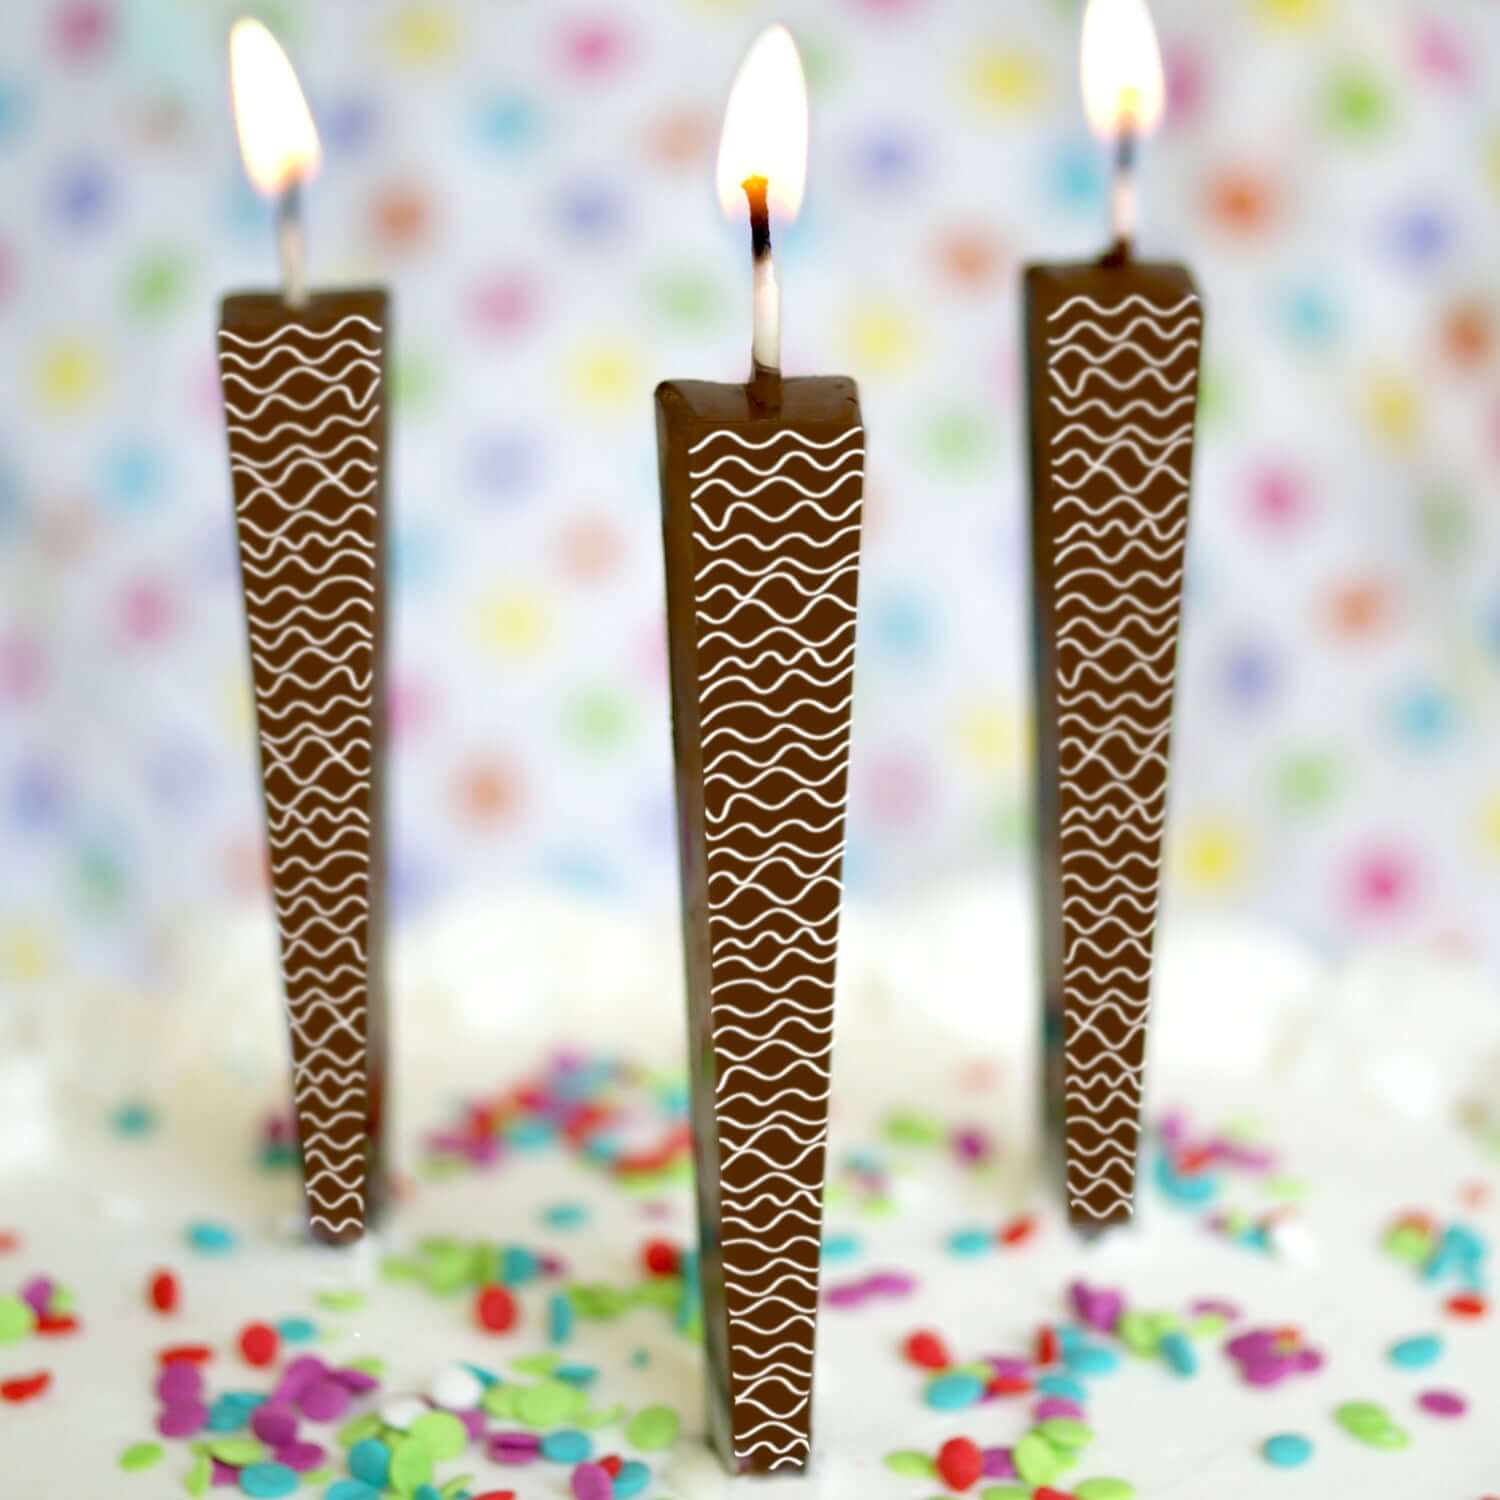 Edible Milk Chocolate Candles with white waves on cake with sprinkles | Let Them Eat Candles